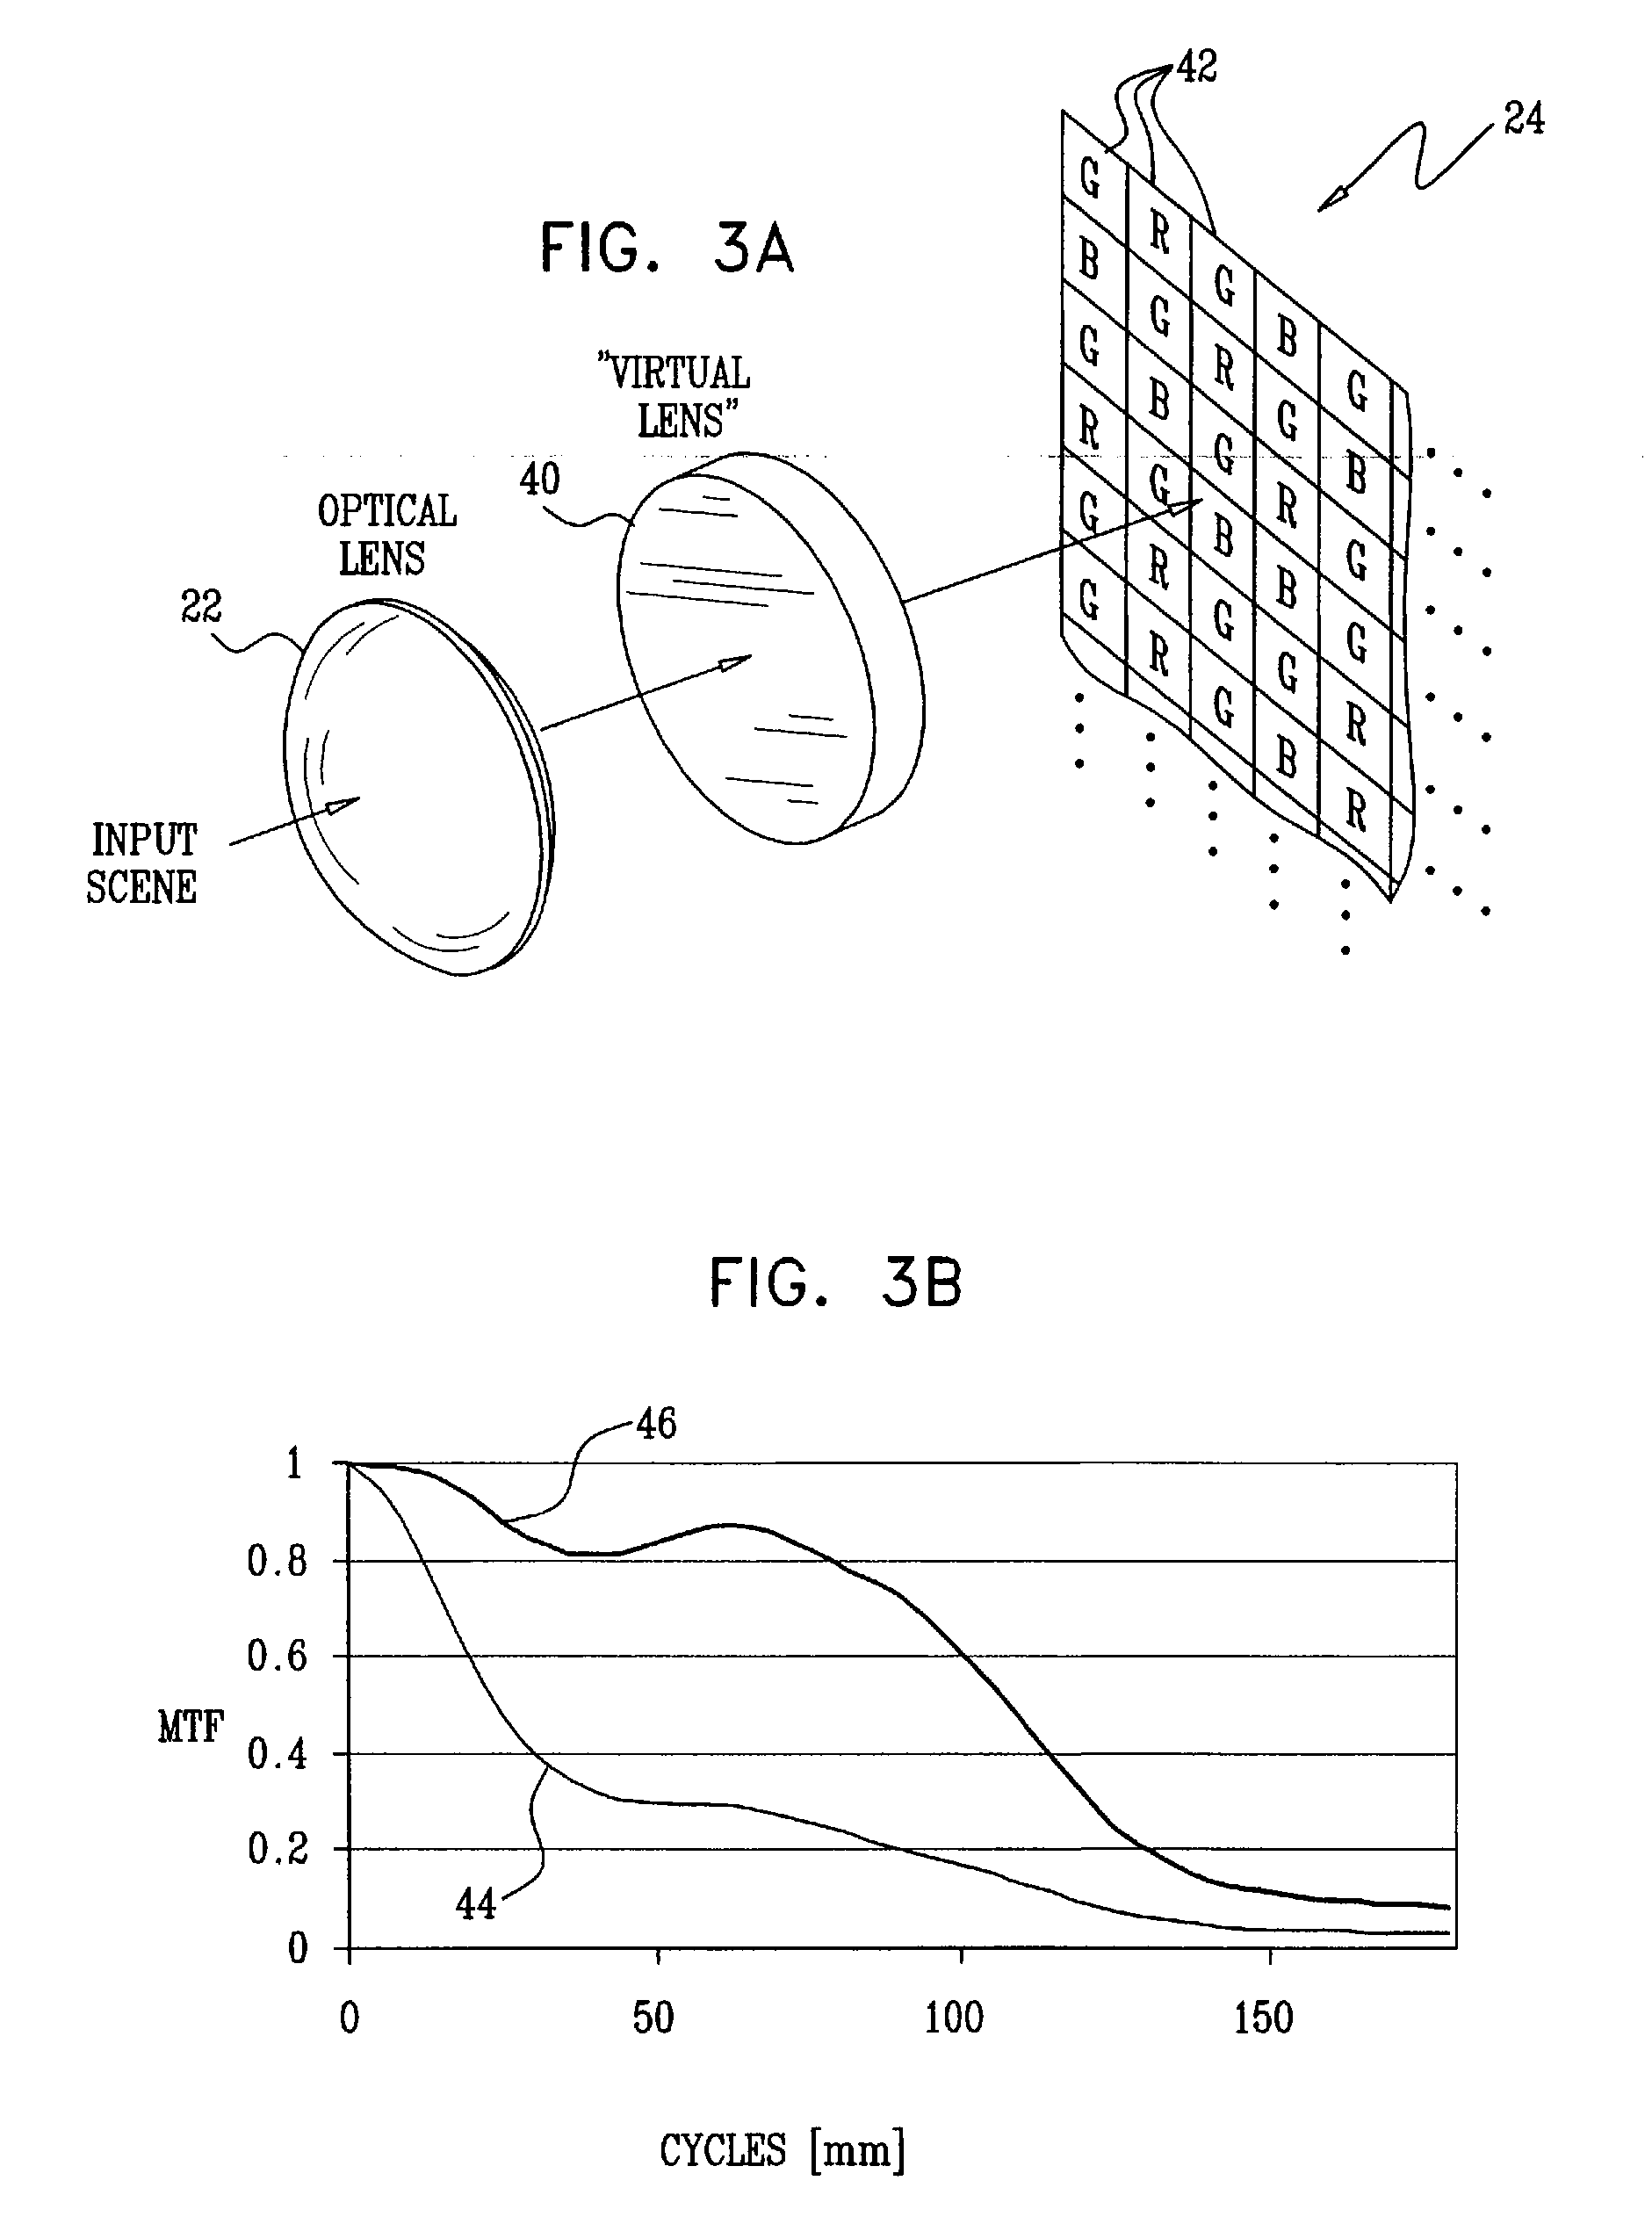 Combined design of optical and image processing elements